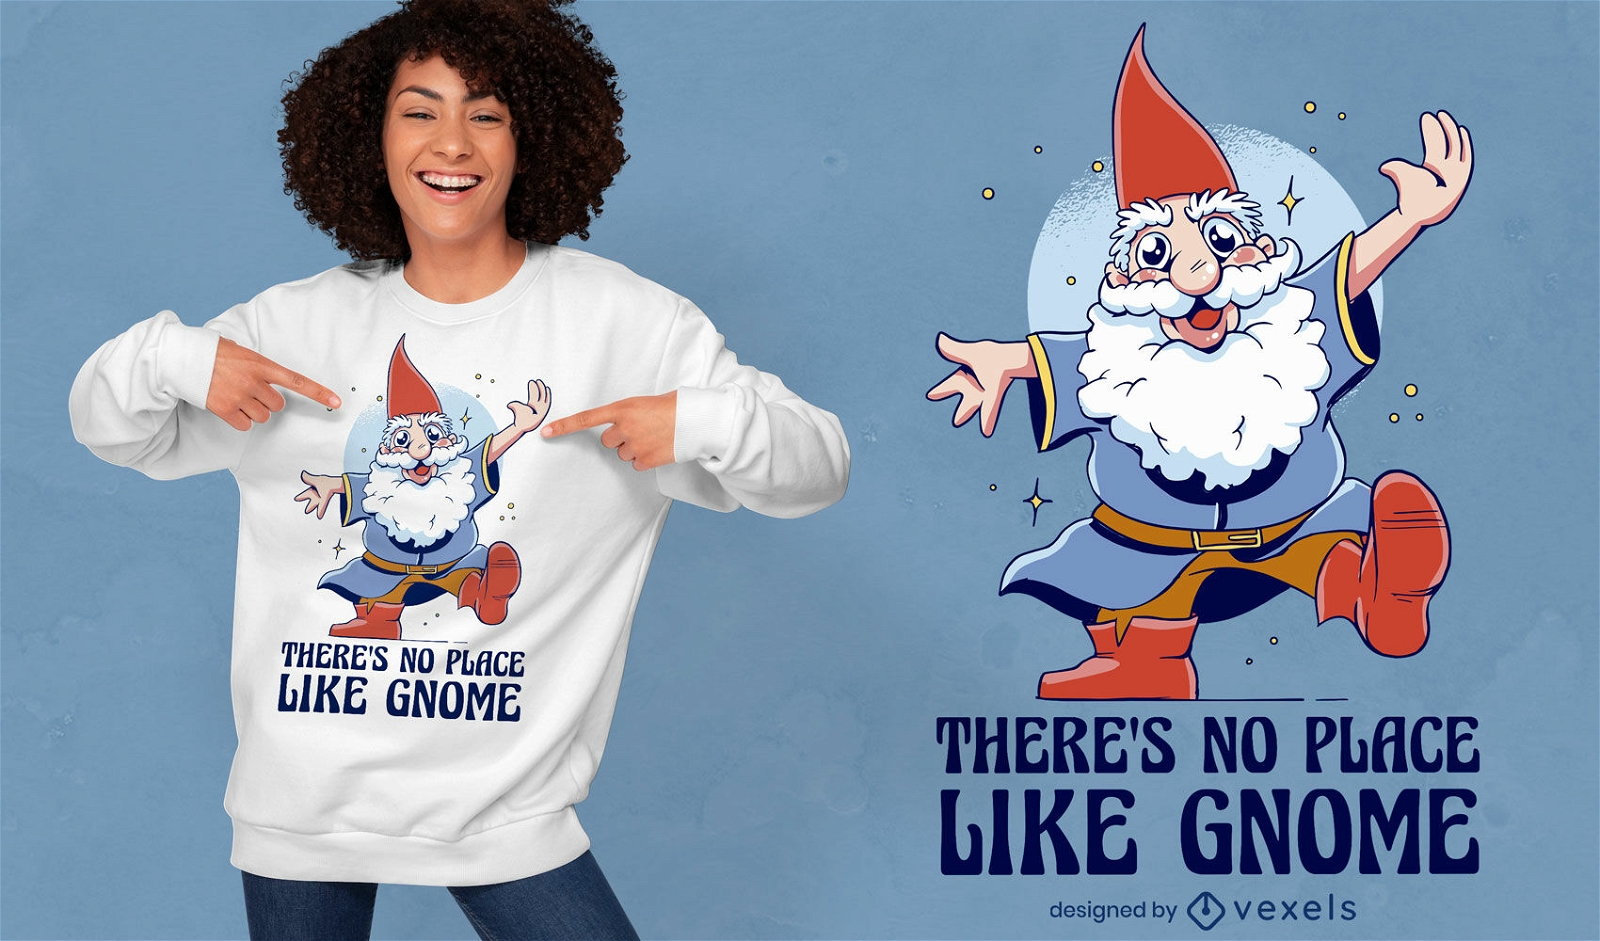 There's no place like gnome t-shirt design